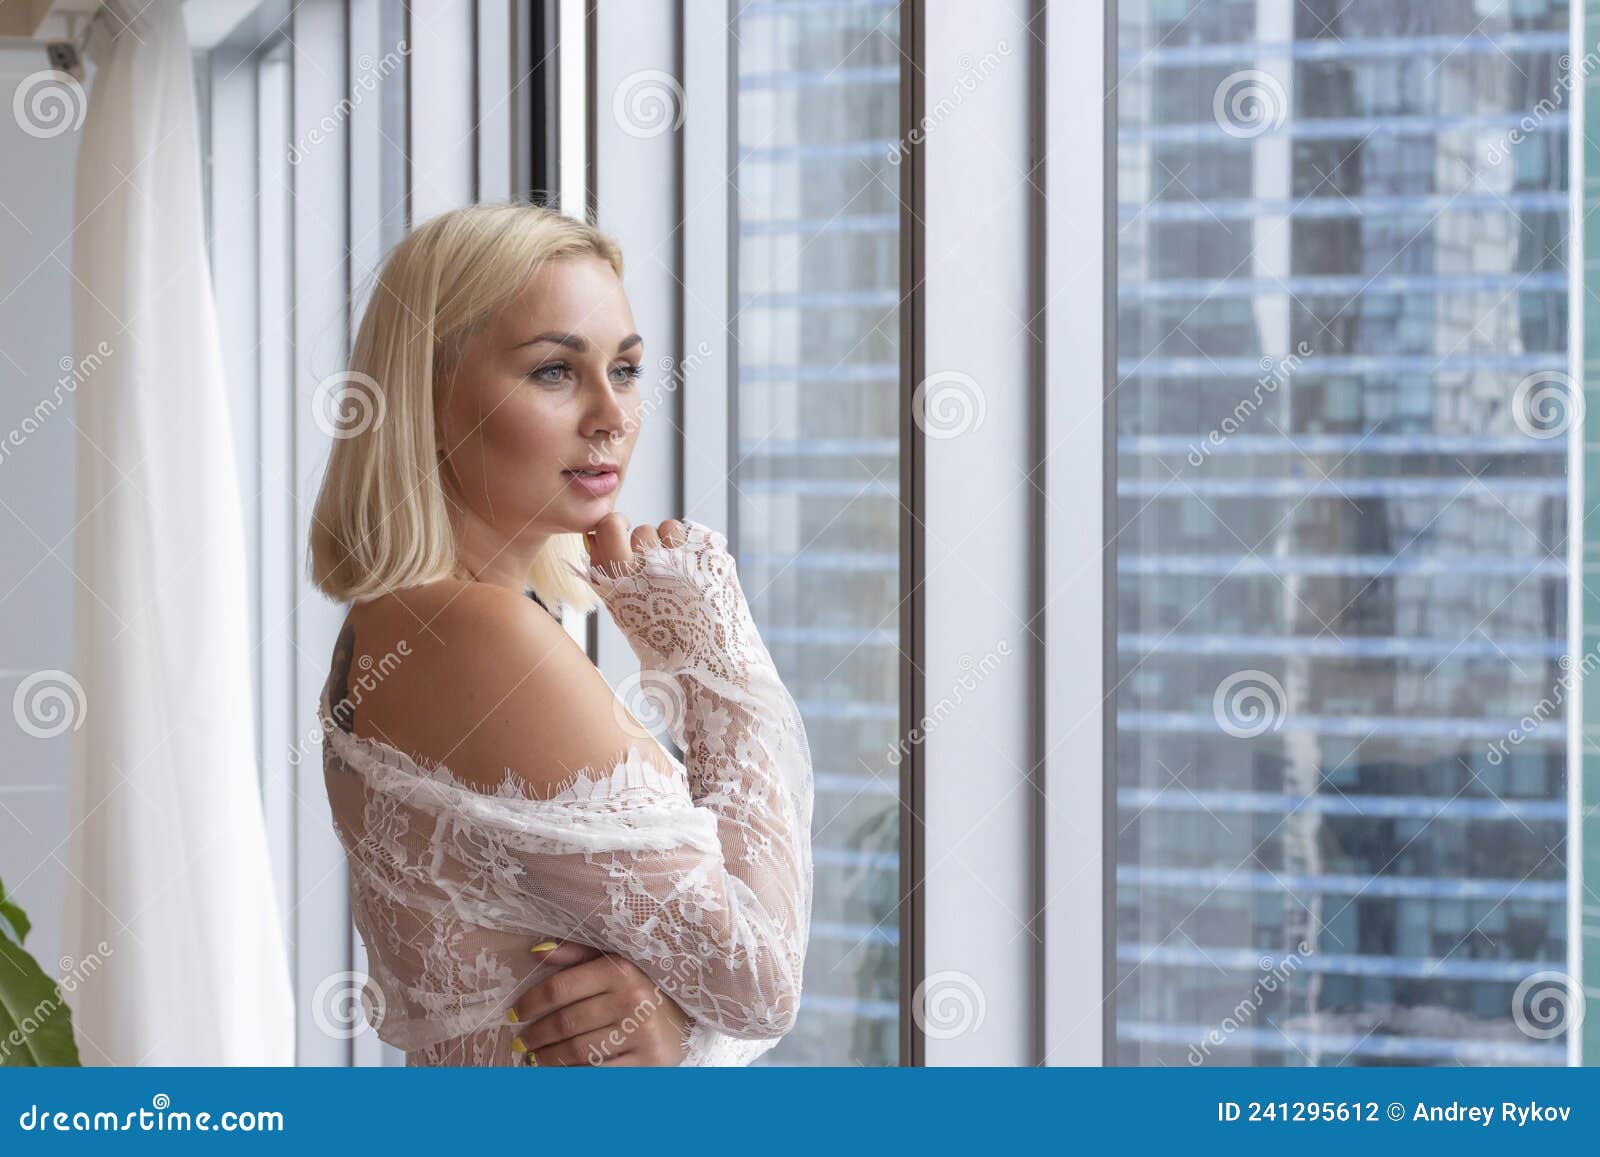 406 Sexy Woman Negligee Stock Photos - Free & Royalty-Free Stock Photos  from Dreamstime